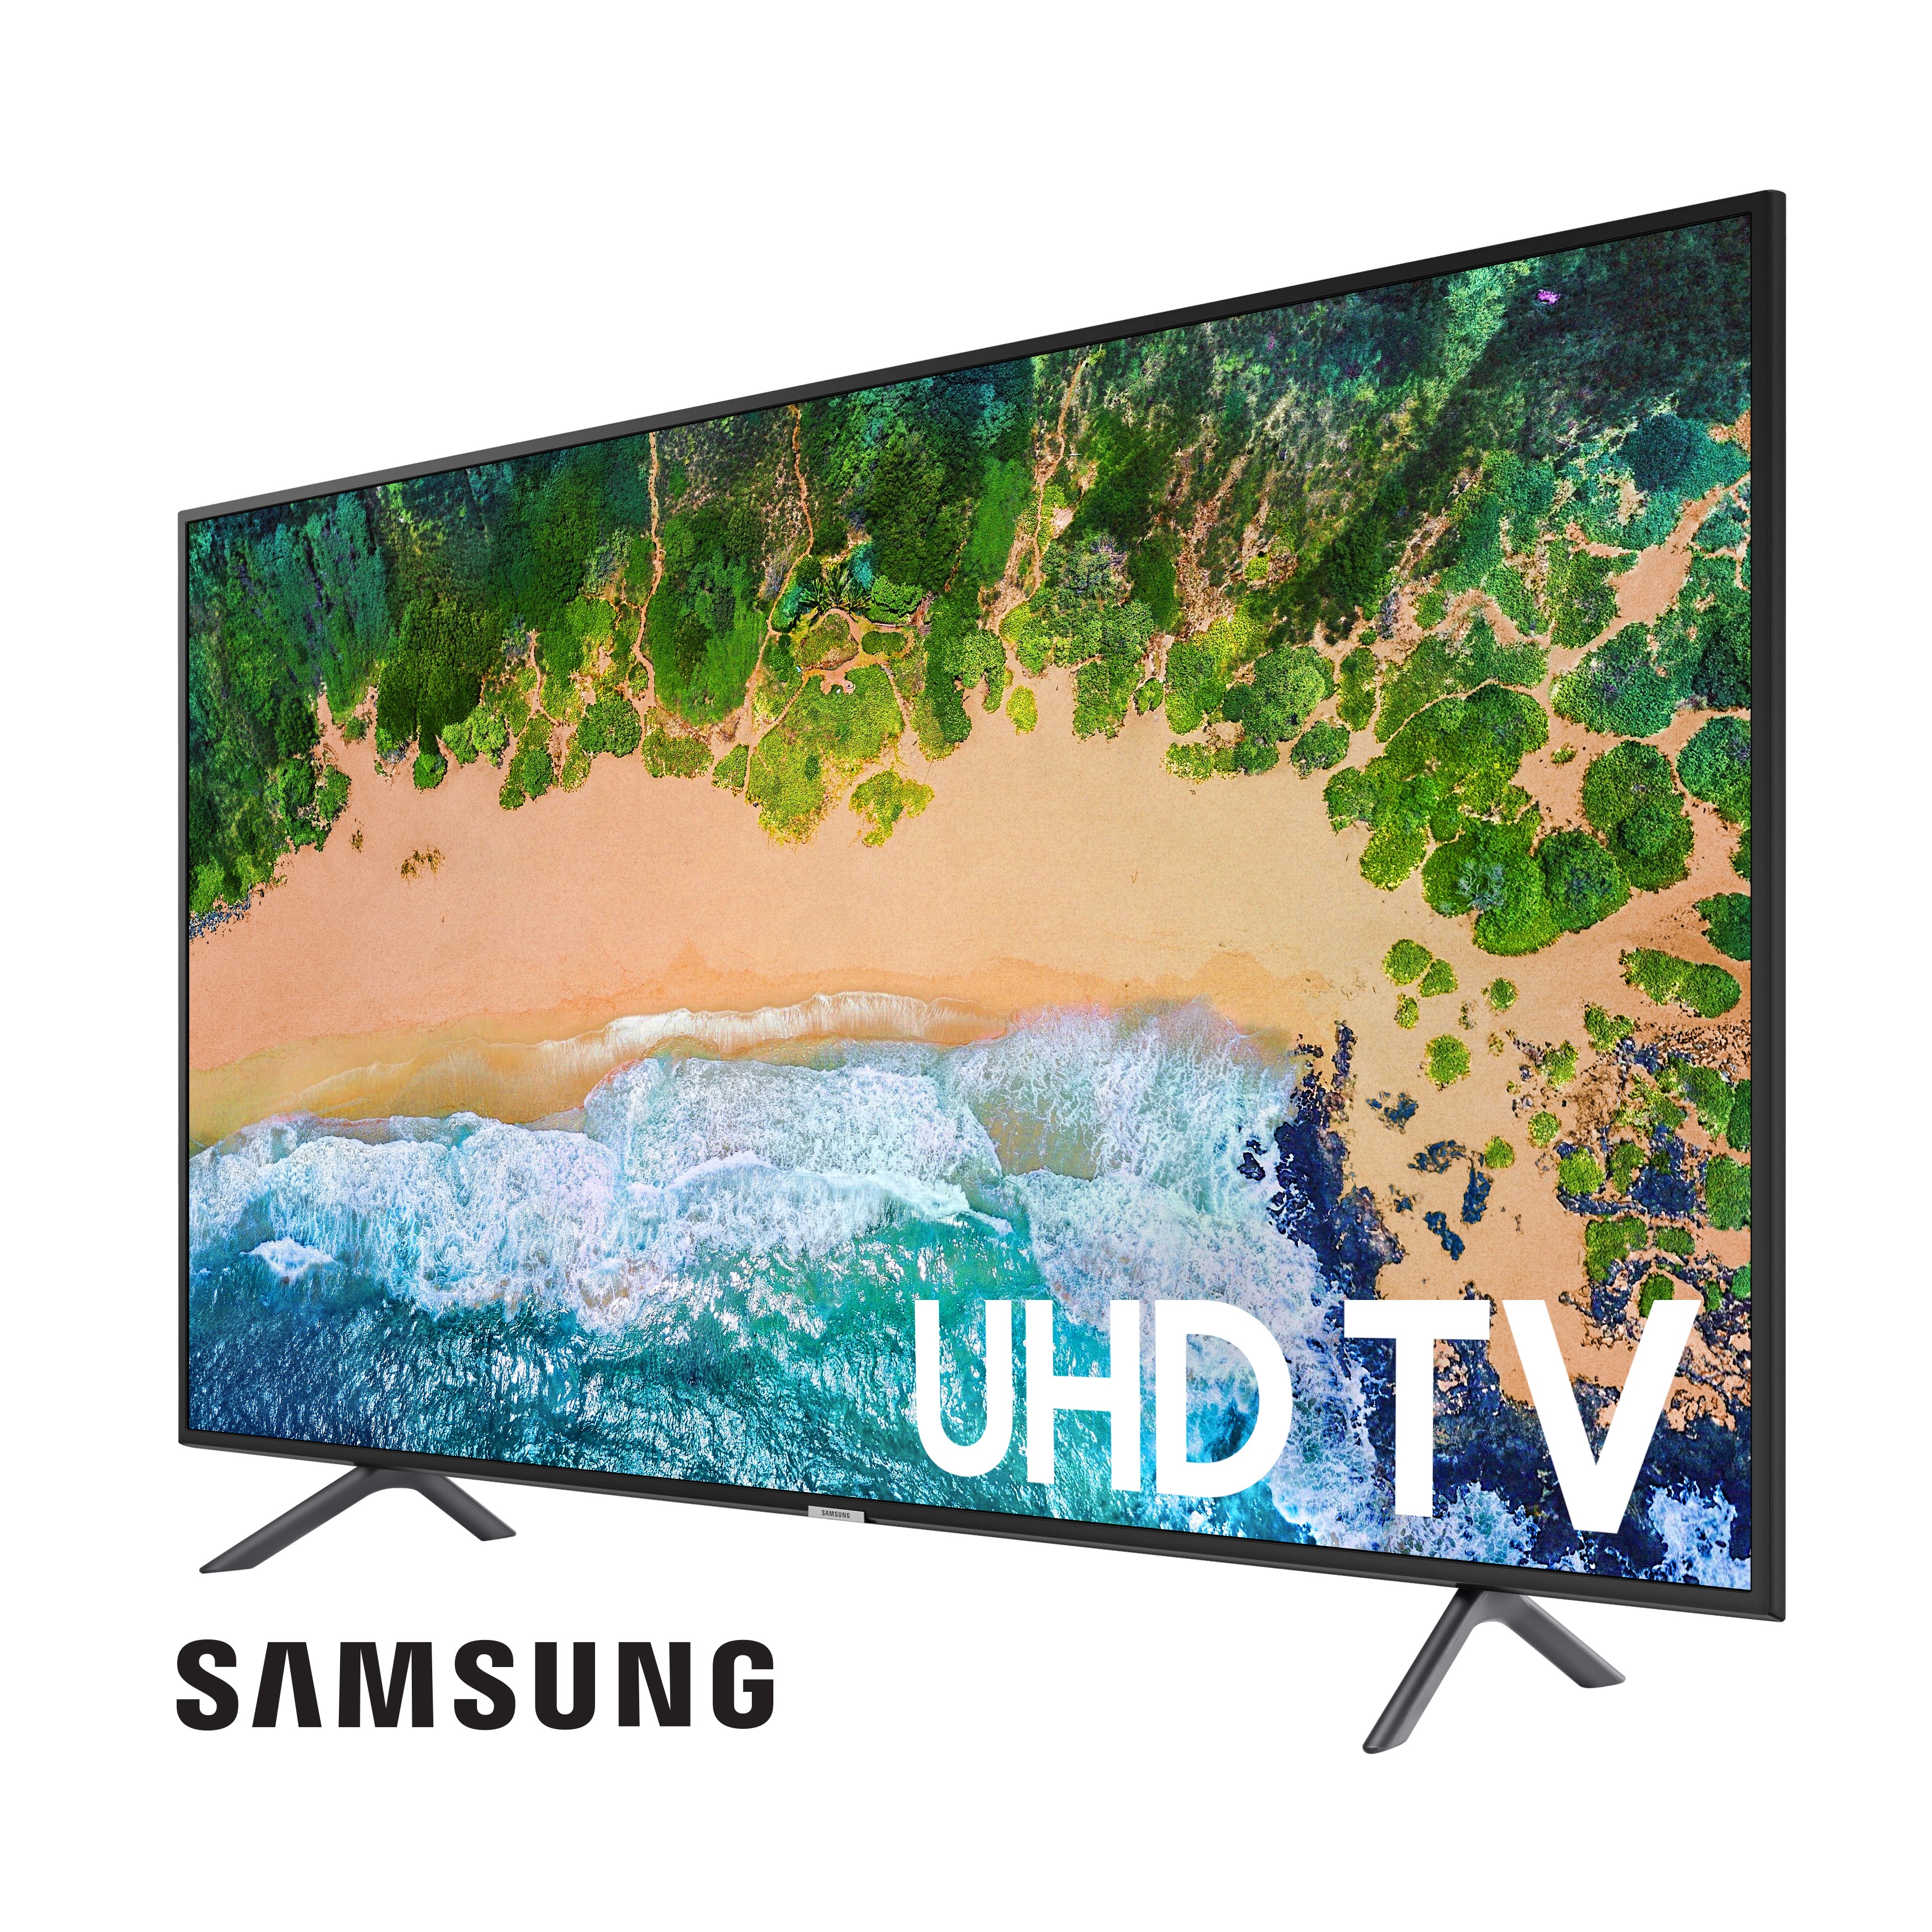 SAMSUNG 75" Class 4K UHD 2160p LED Smart TV with HDR UN75NU6900 - image 4 of 22